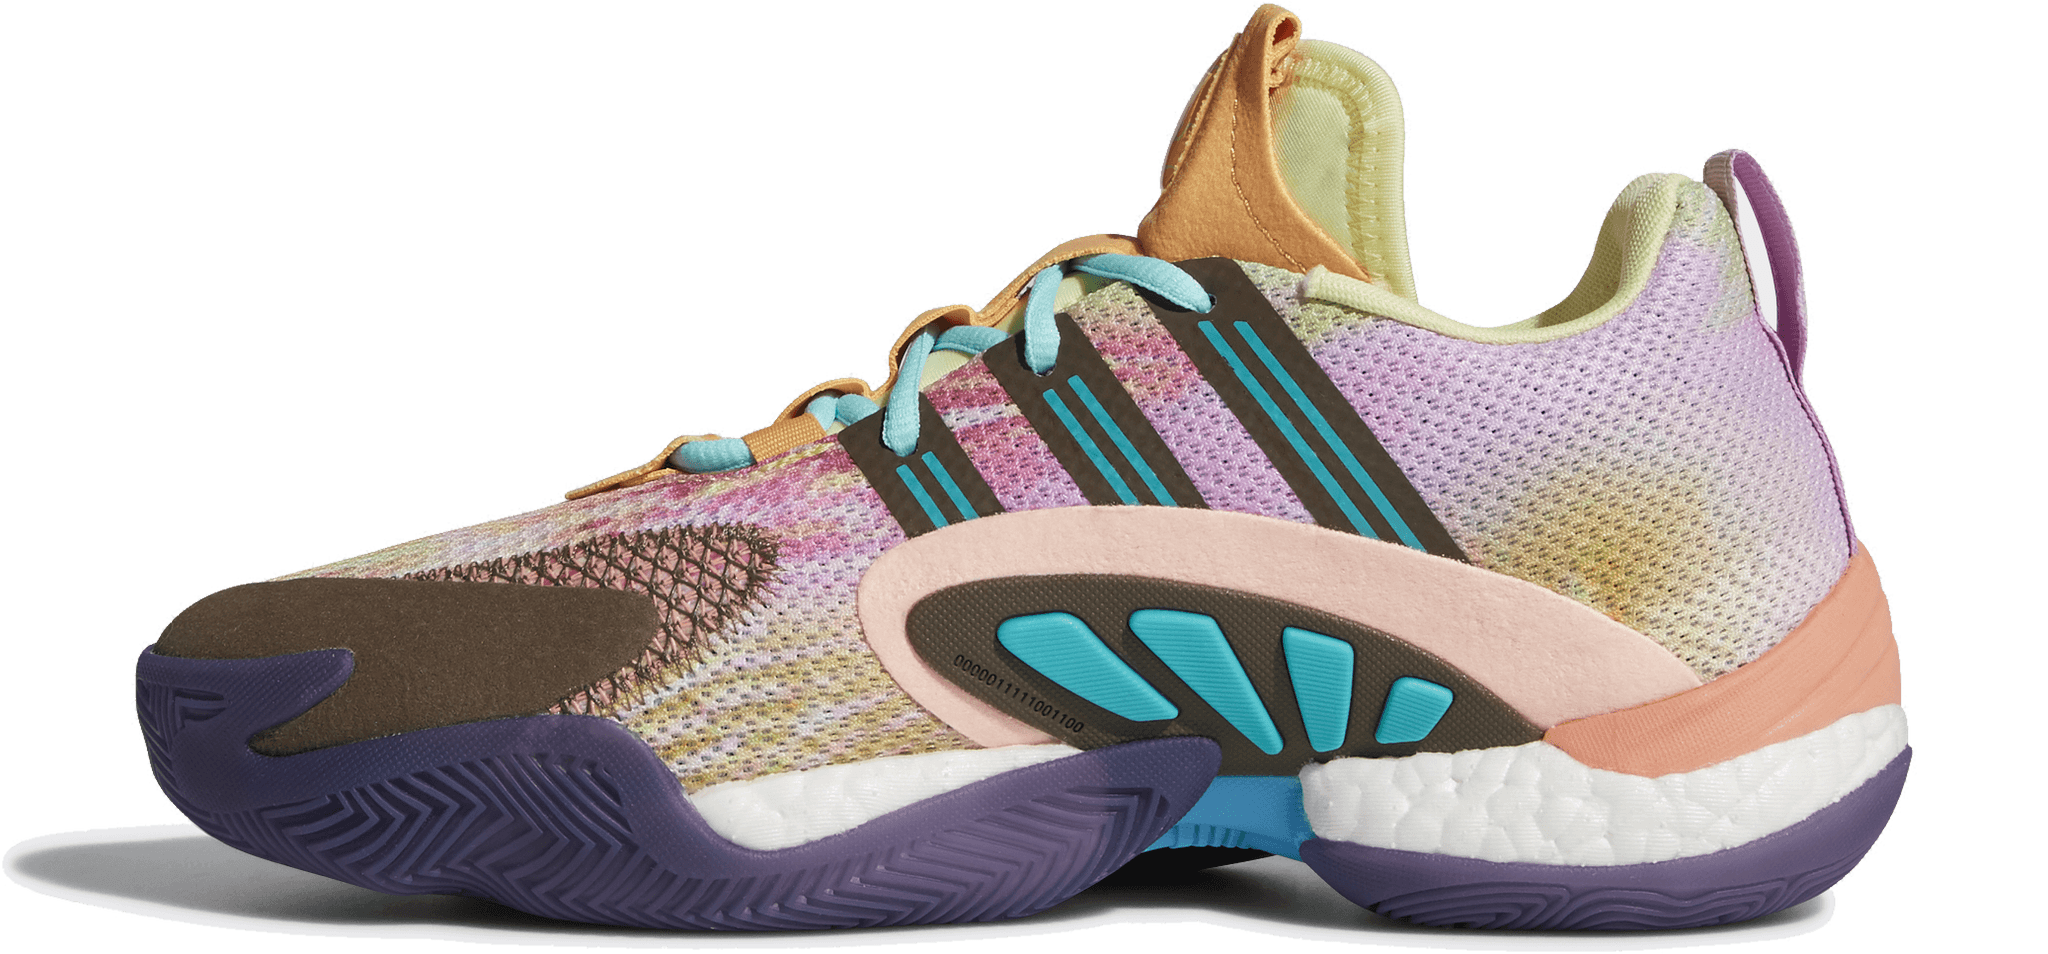 best adidas basketball shoes 219